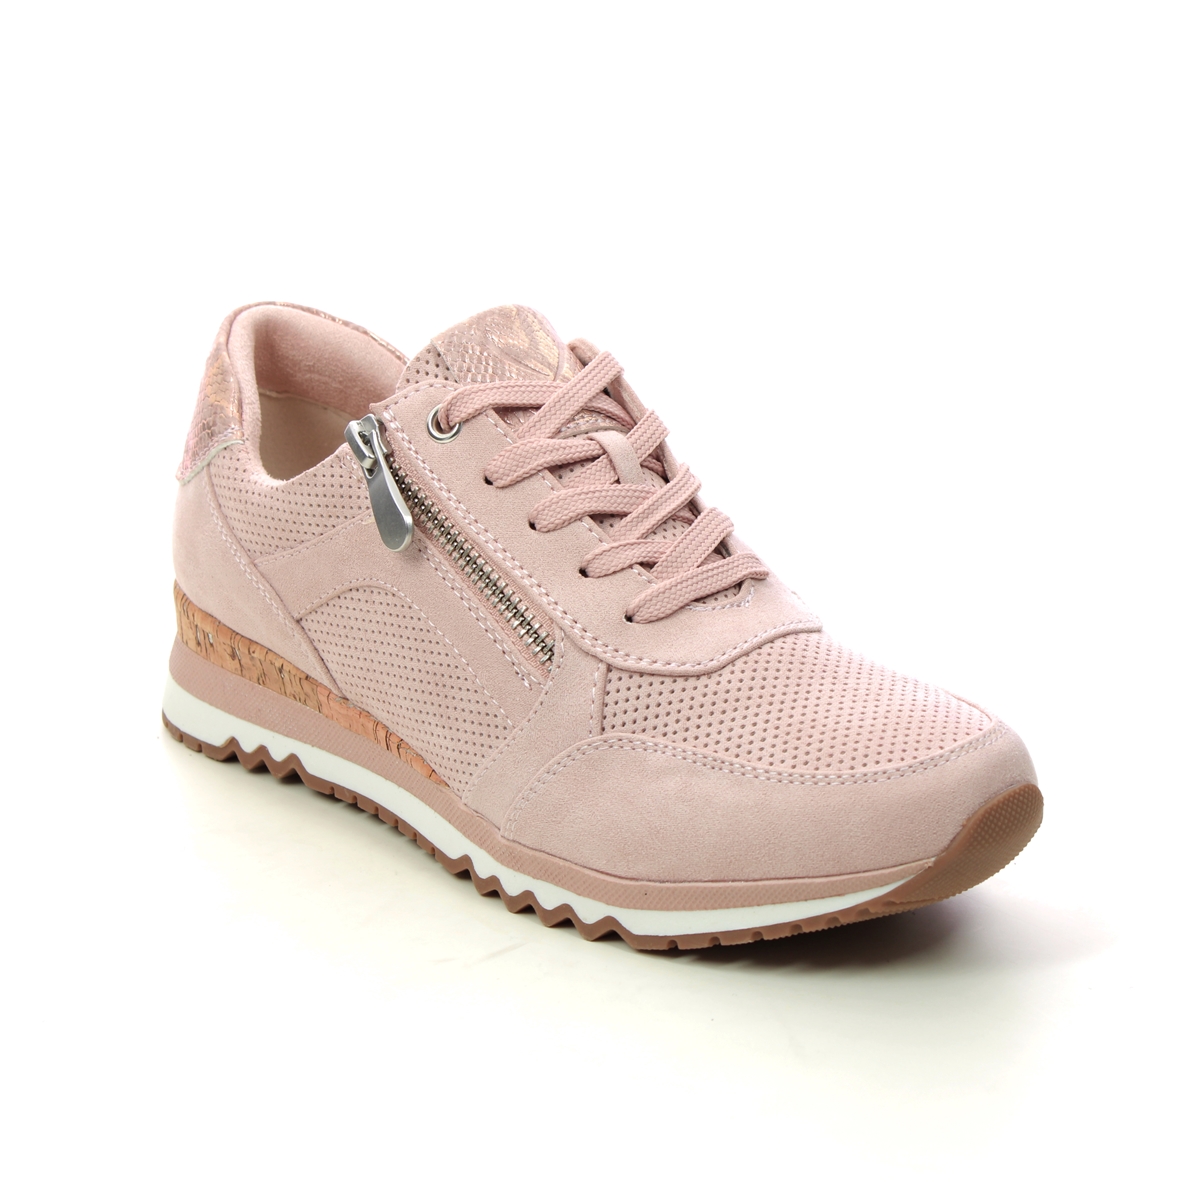 Marco Tozzi Bonallo Cork Rose Pink Womens Trainers 23781-20-523 In Size 38 In Plain Rose Pink